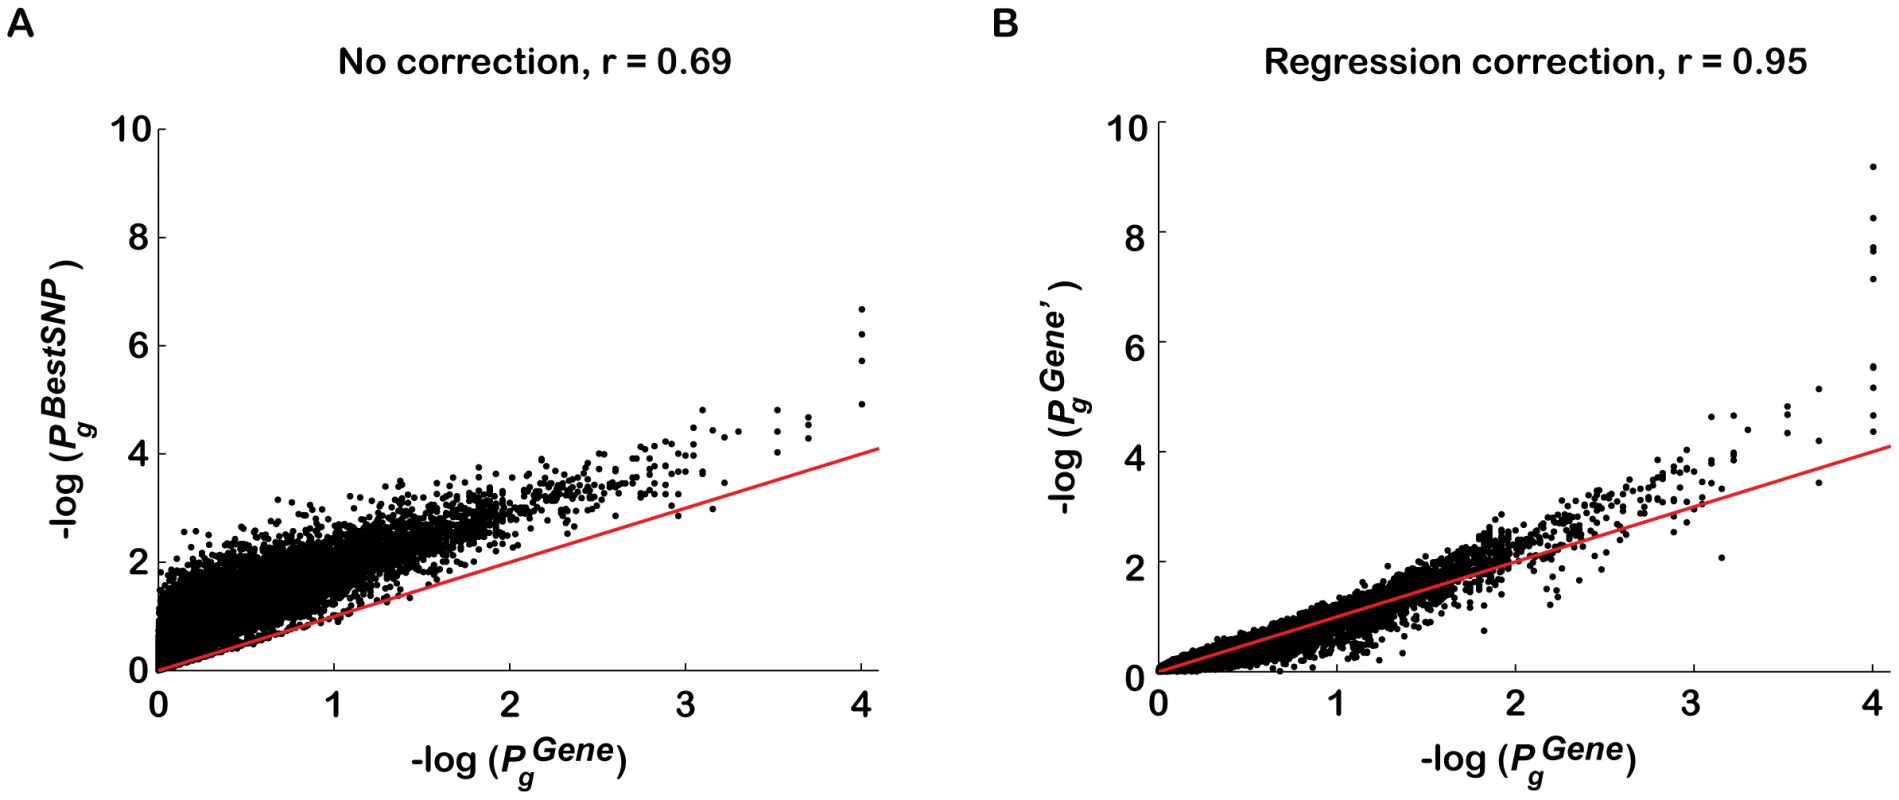 Regression analysis corrects for majority of confounding effects on gene association scores in a genotype-independent manner.